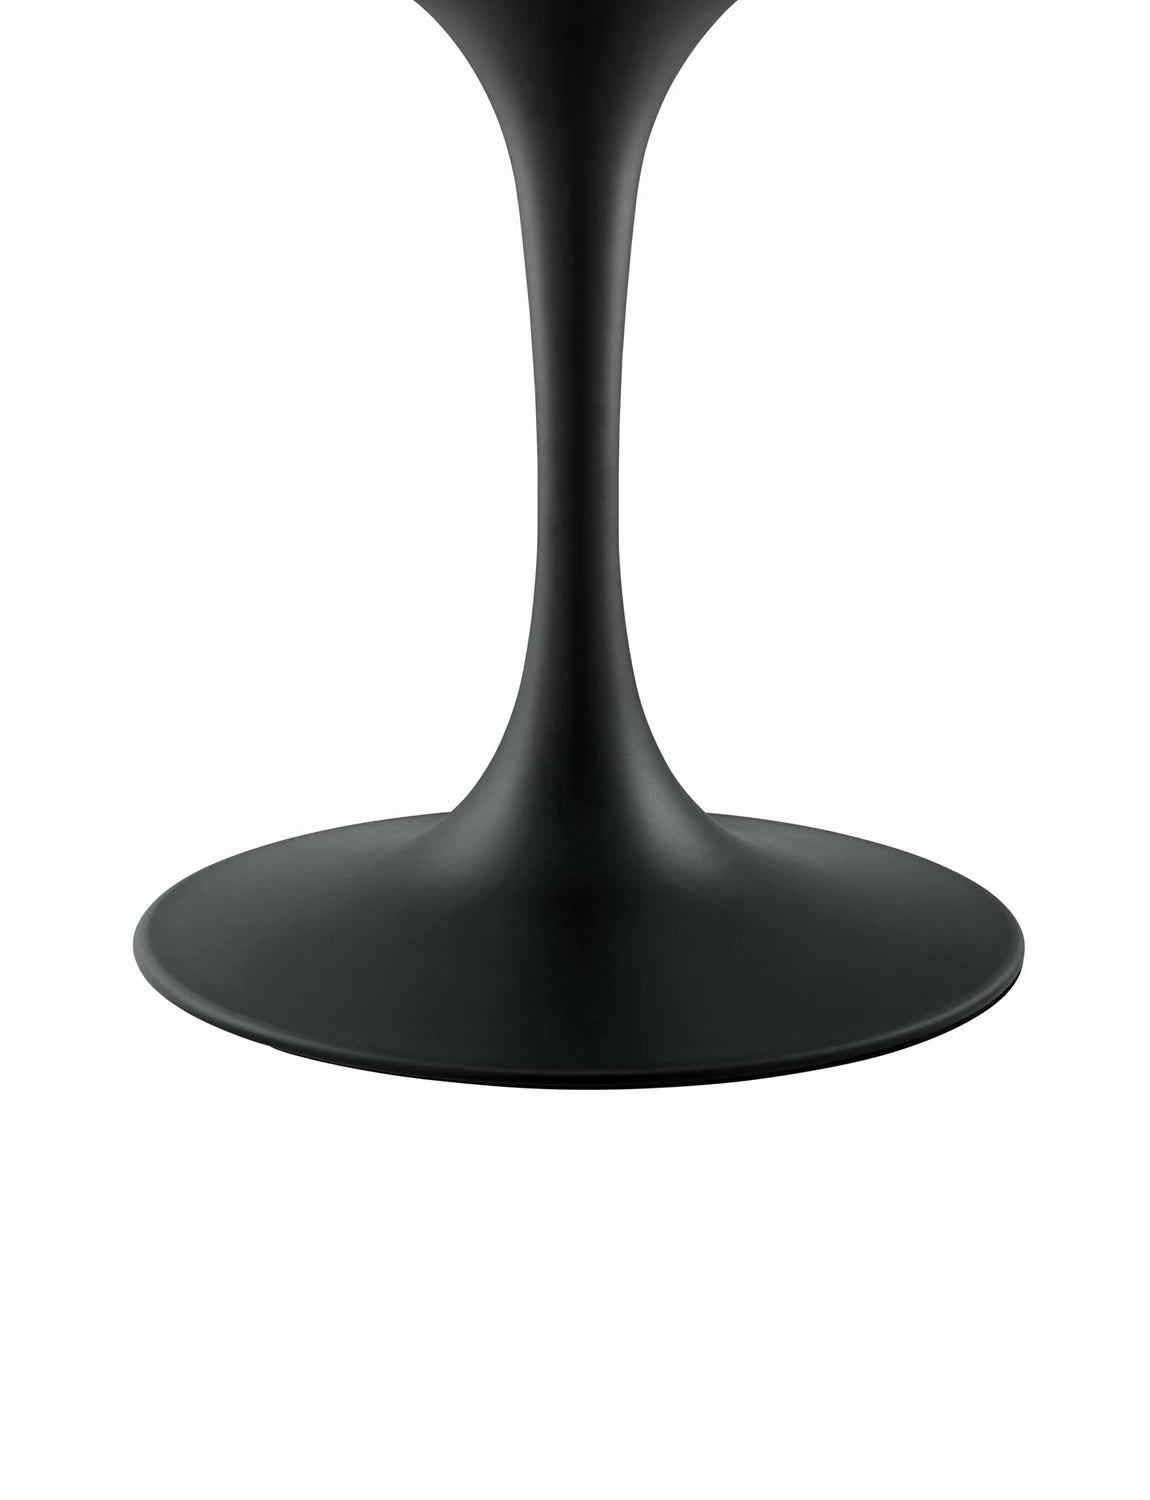 Lily White Oval Dining Table, black base